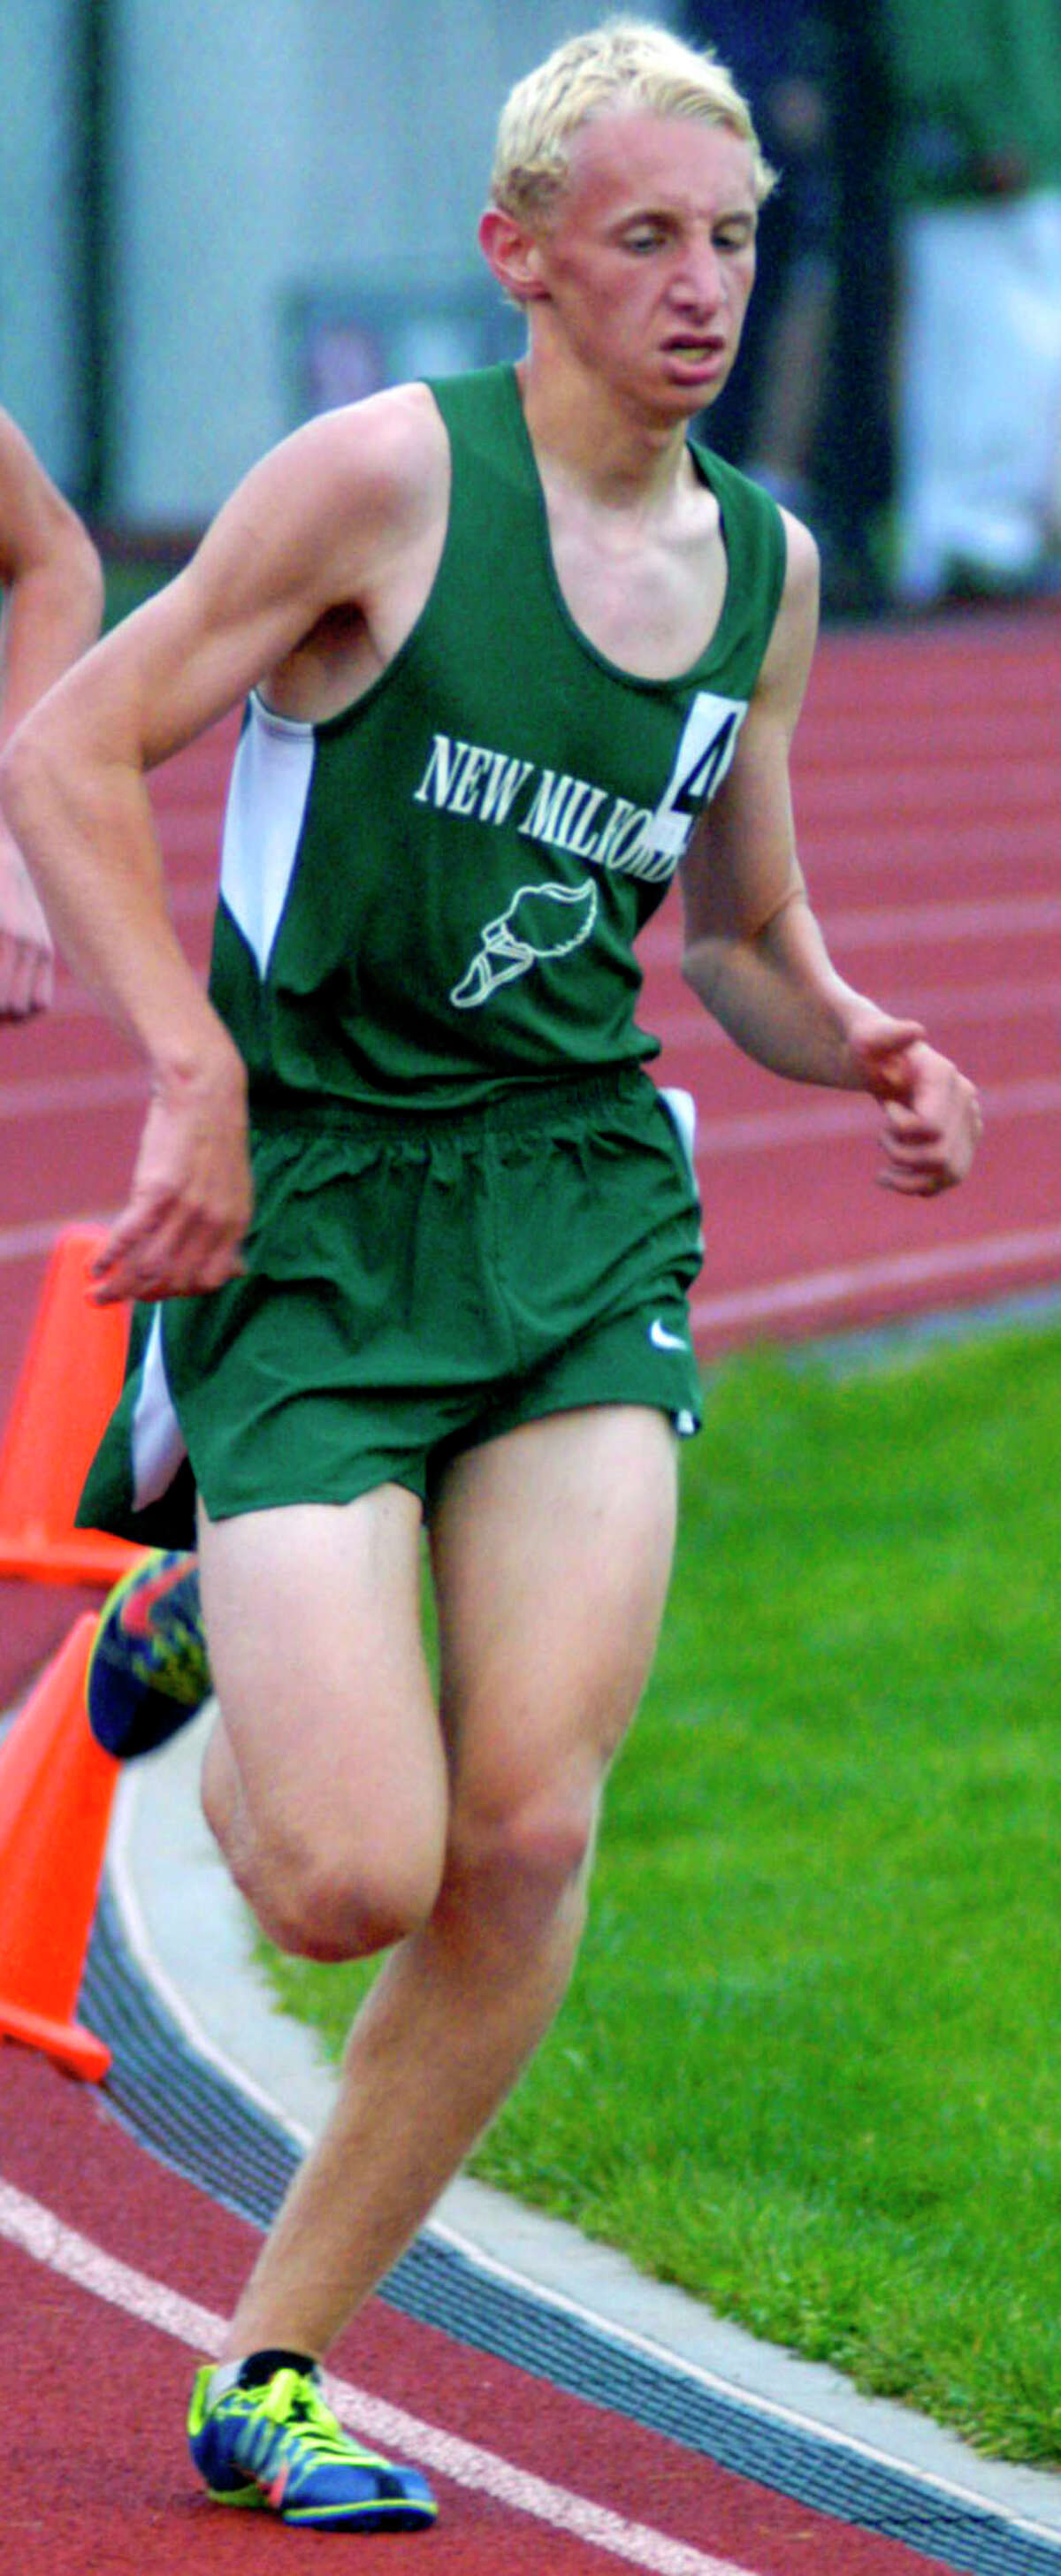 Green Wave junior John Hansell proved the most productive individual performer for the New Milford High School boys' track team with his fourth place in the 3,200 meters and fifth place in the 1,600 at the May 20, 2012 South-West Conference track and field championship meet in Bethel.